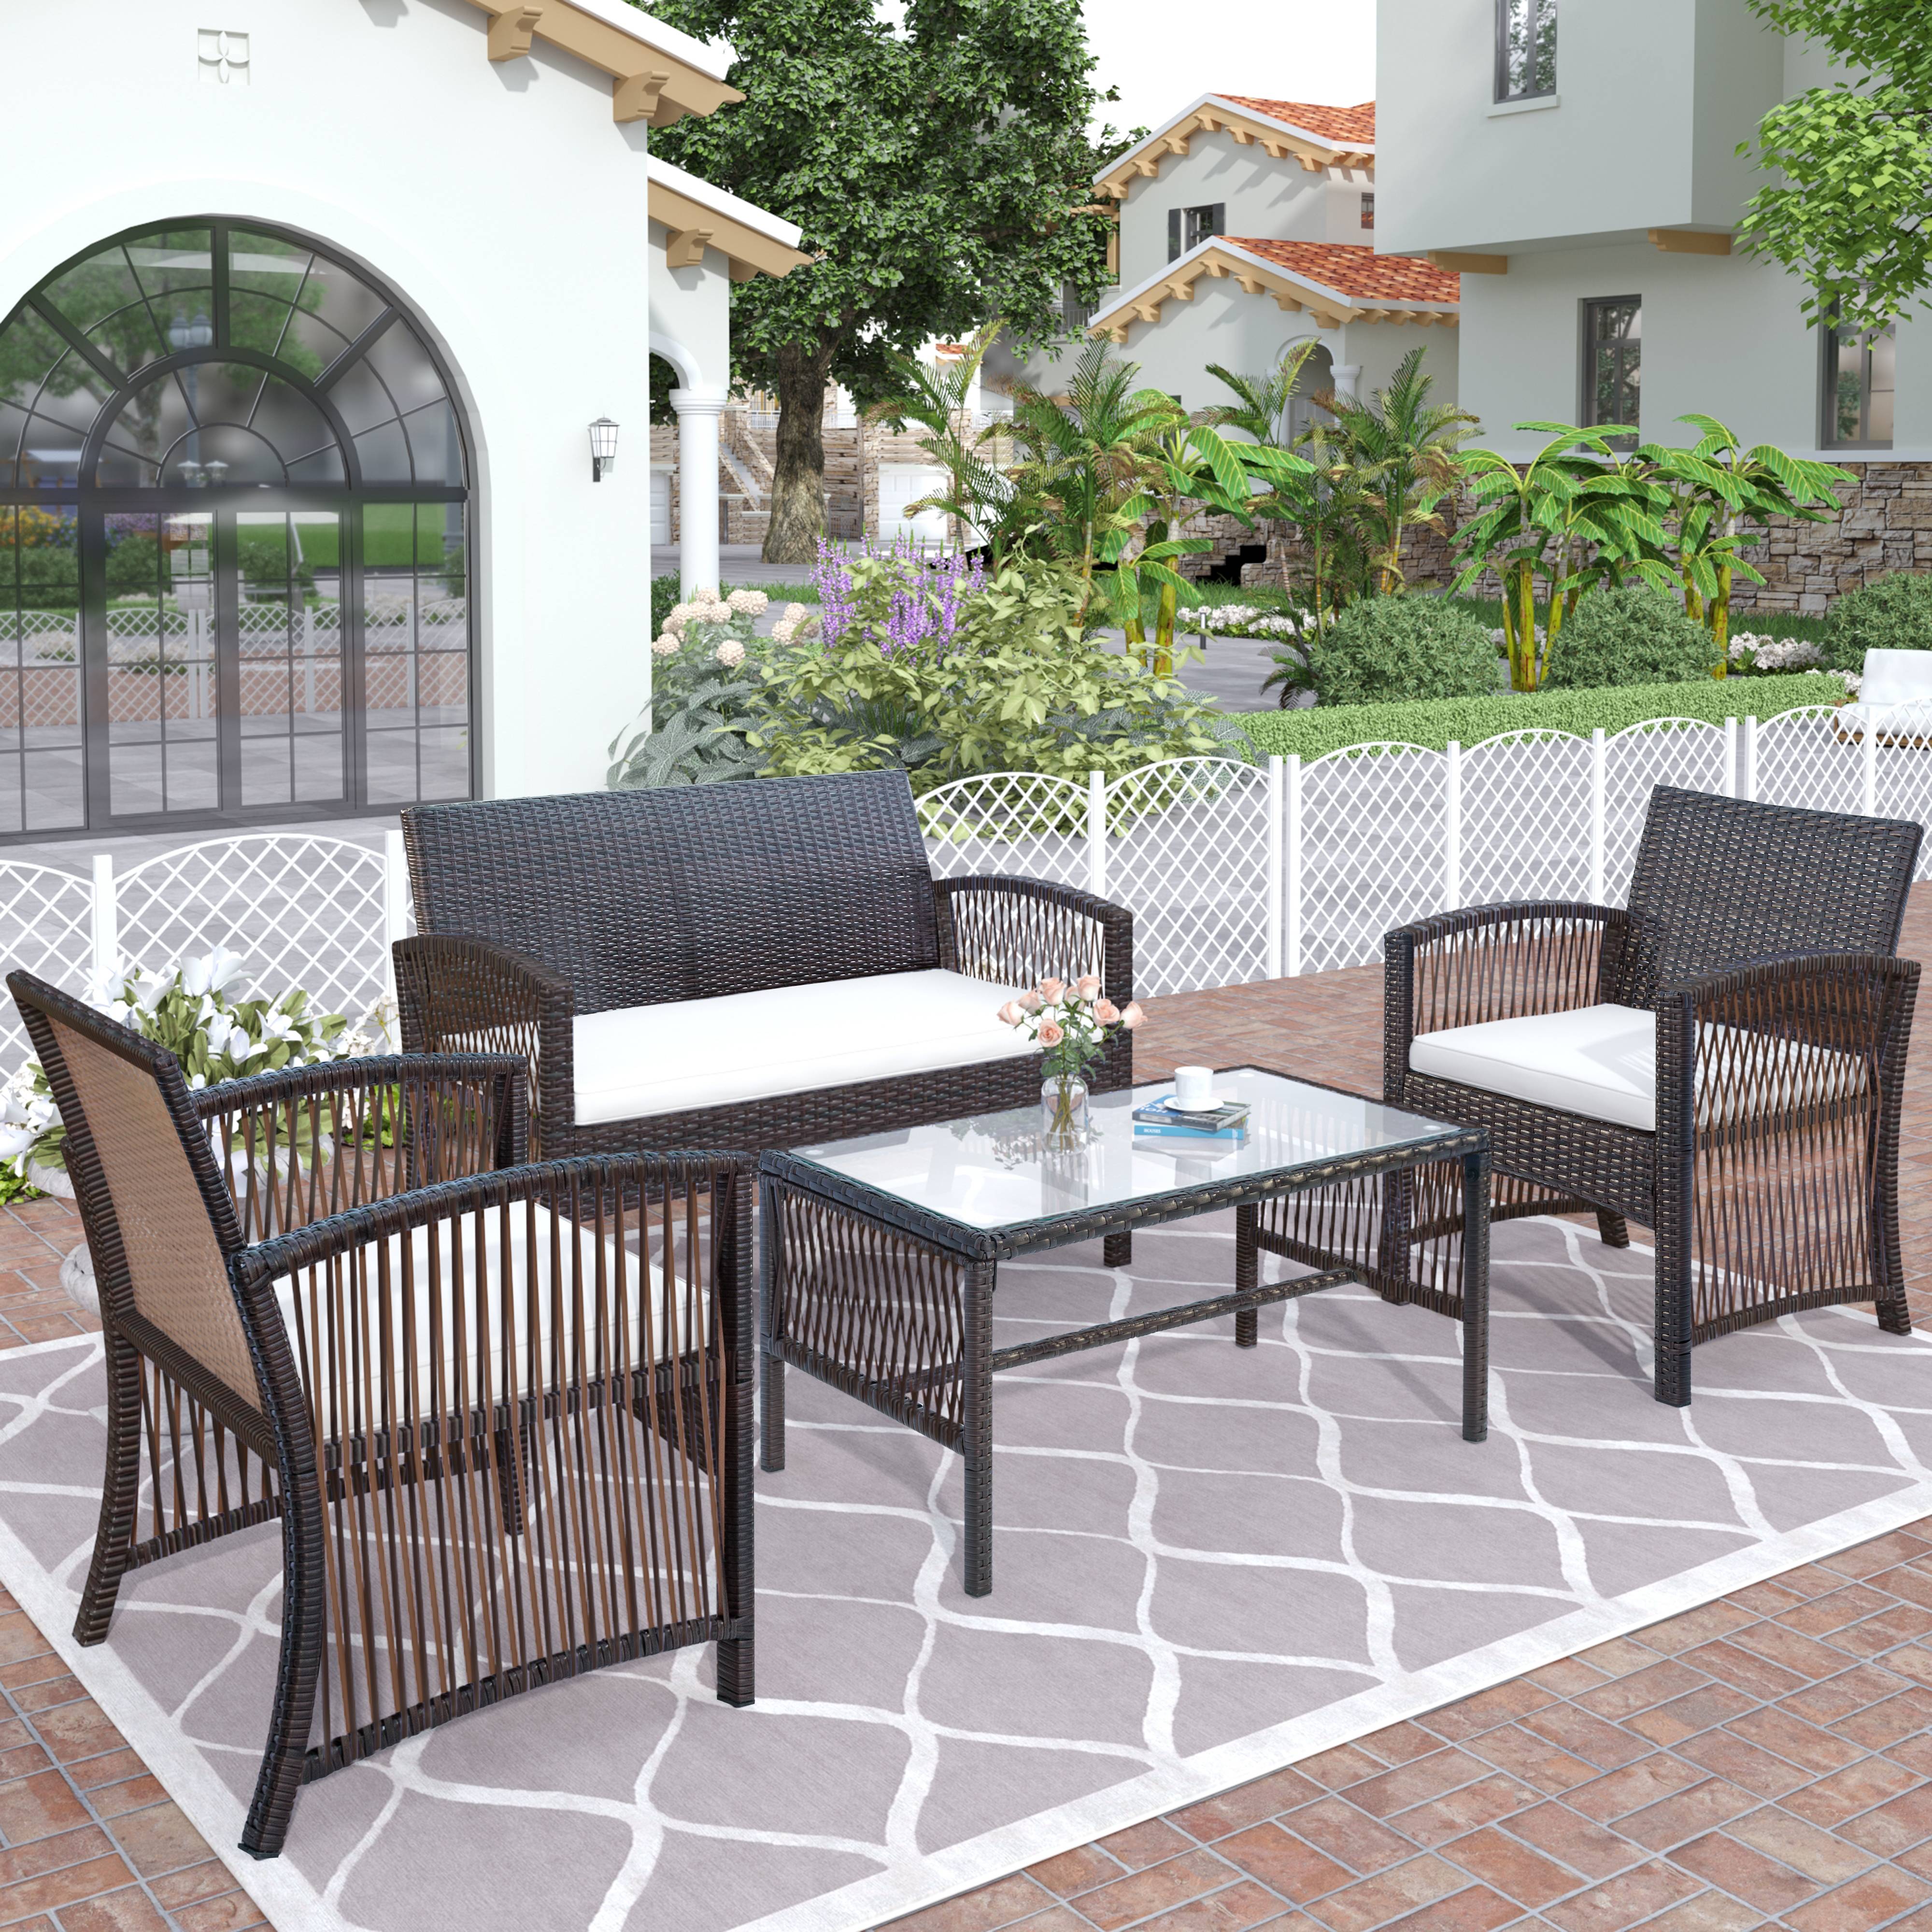 4 Pieces Outdoor Patio Furniture Sets, PE Rattan Chair Wicker Set with Two Single Sofa, One Loveseat, Tempered Glass Table, Backyard Porch Garden Poolside Balcony Furniture Sets, Q8591 - image 3 of 13